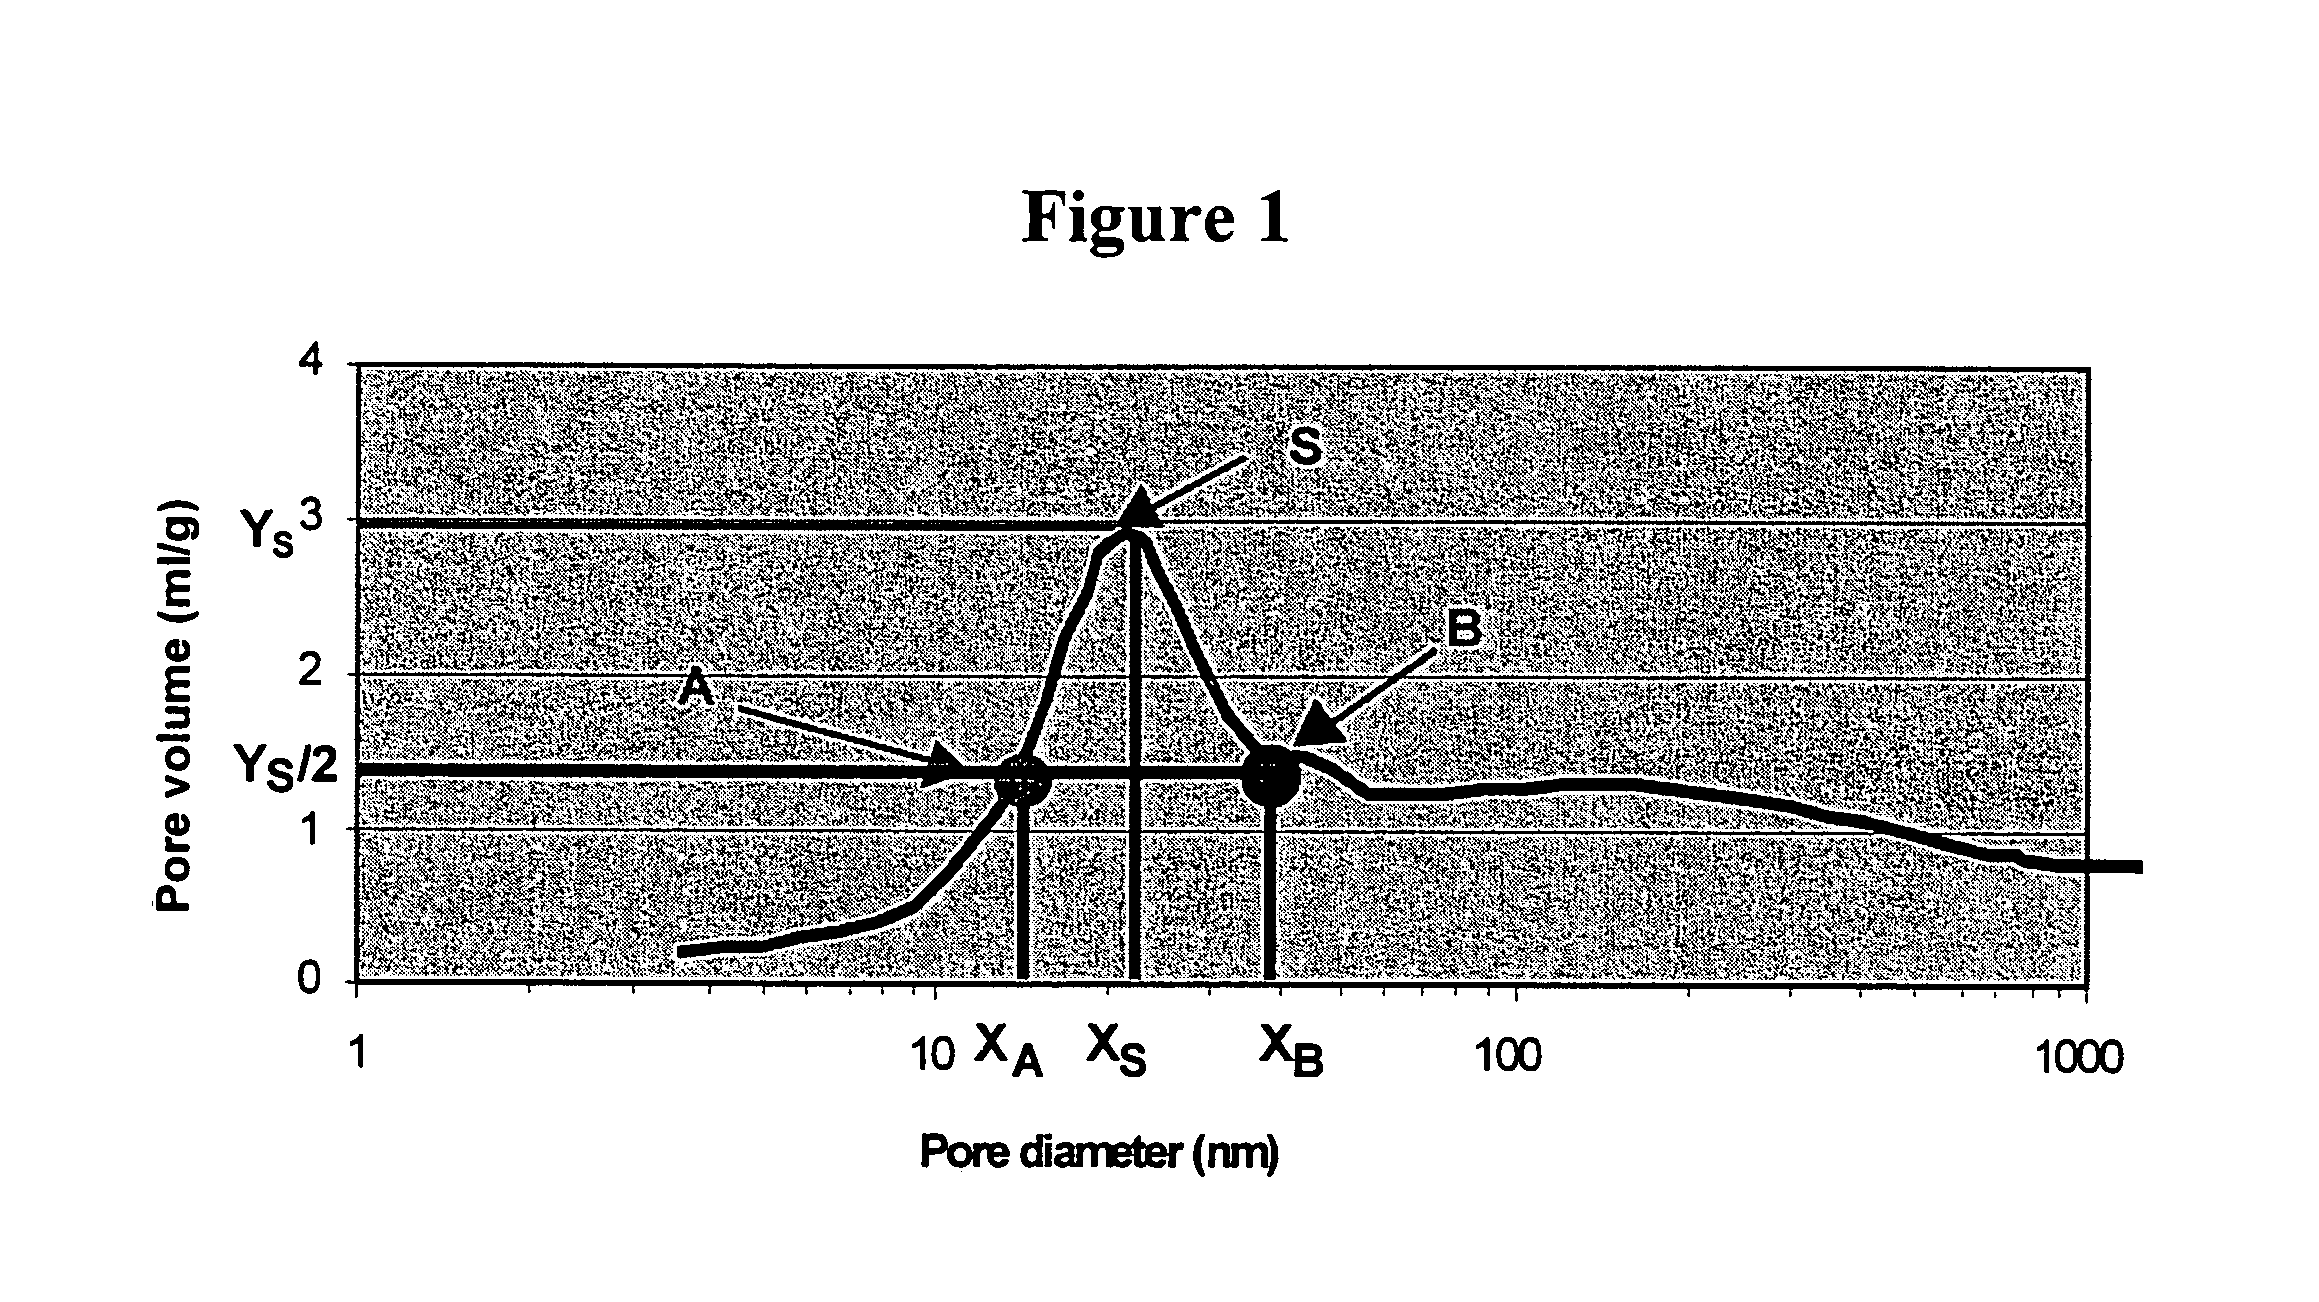 Diene rubber composition for tire comprising a specific silica as reinforcing filler